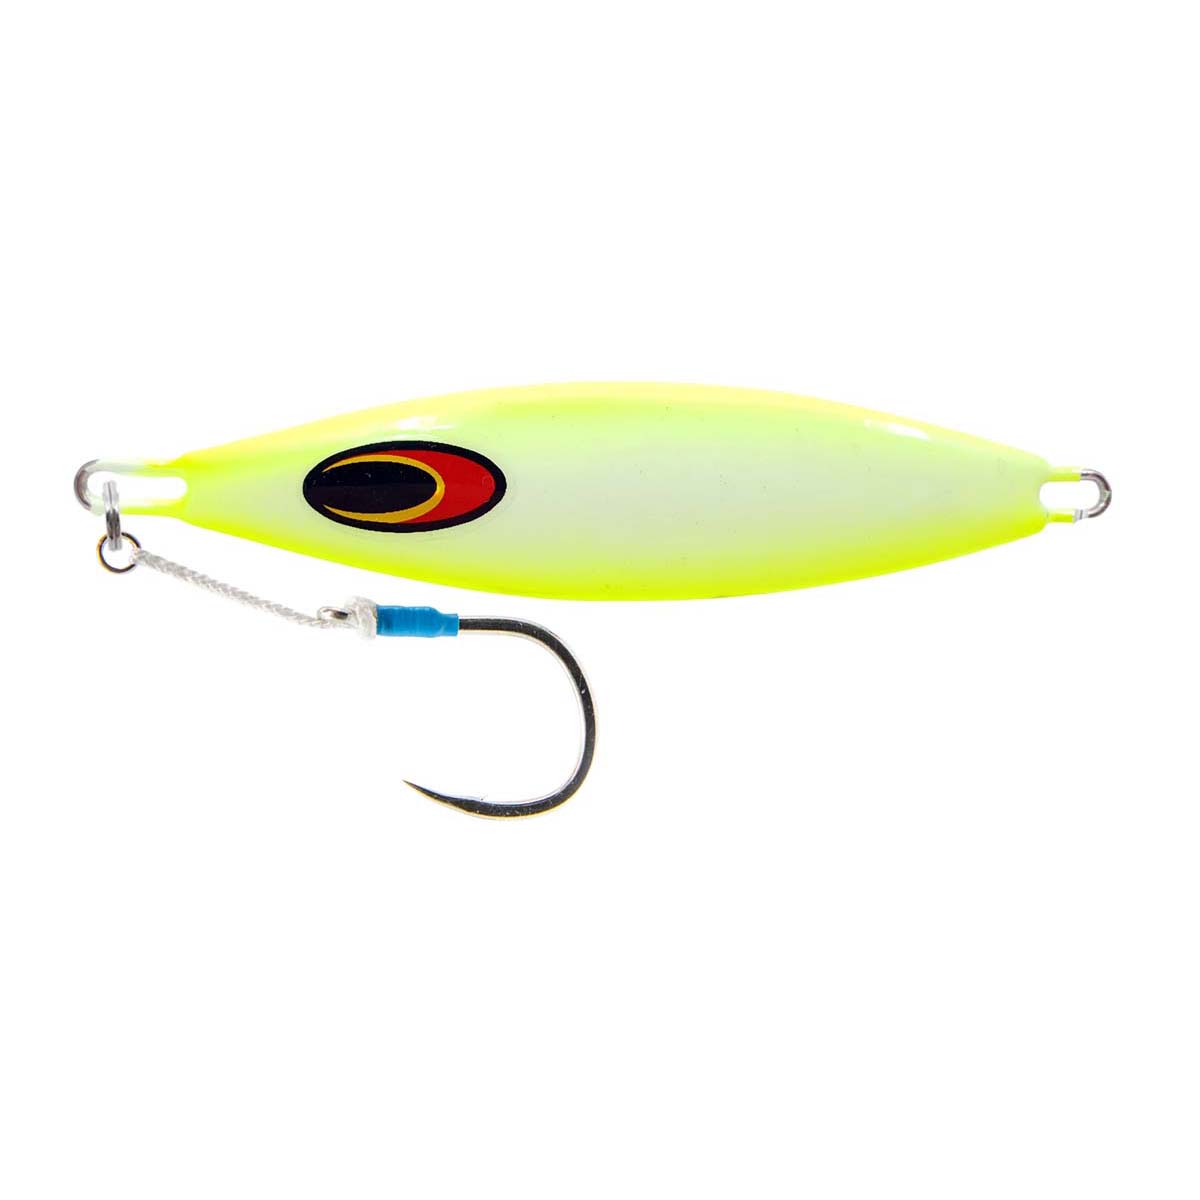 Nomad Buffalo Jig Lure 60g Chartreuse White Glow @ Club BCF